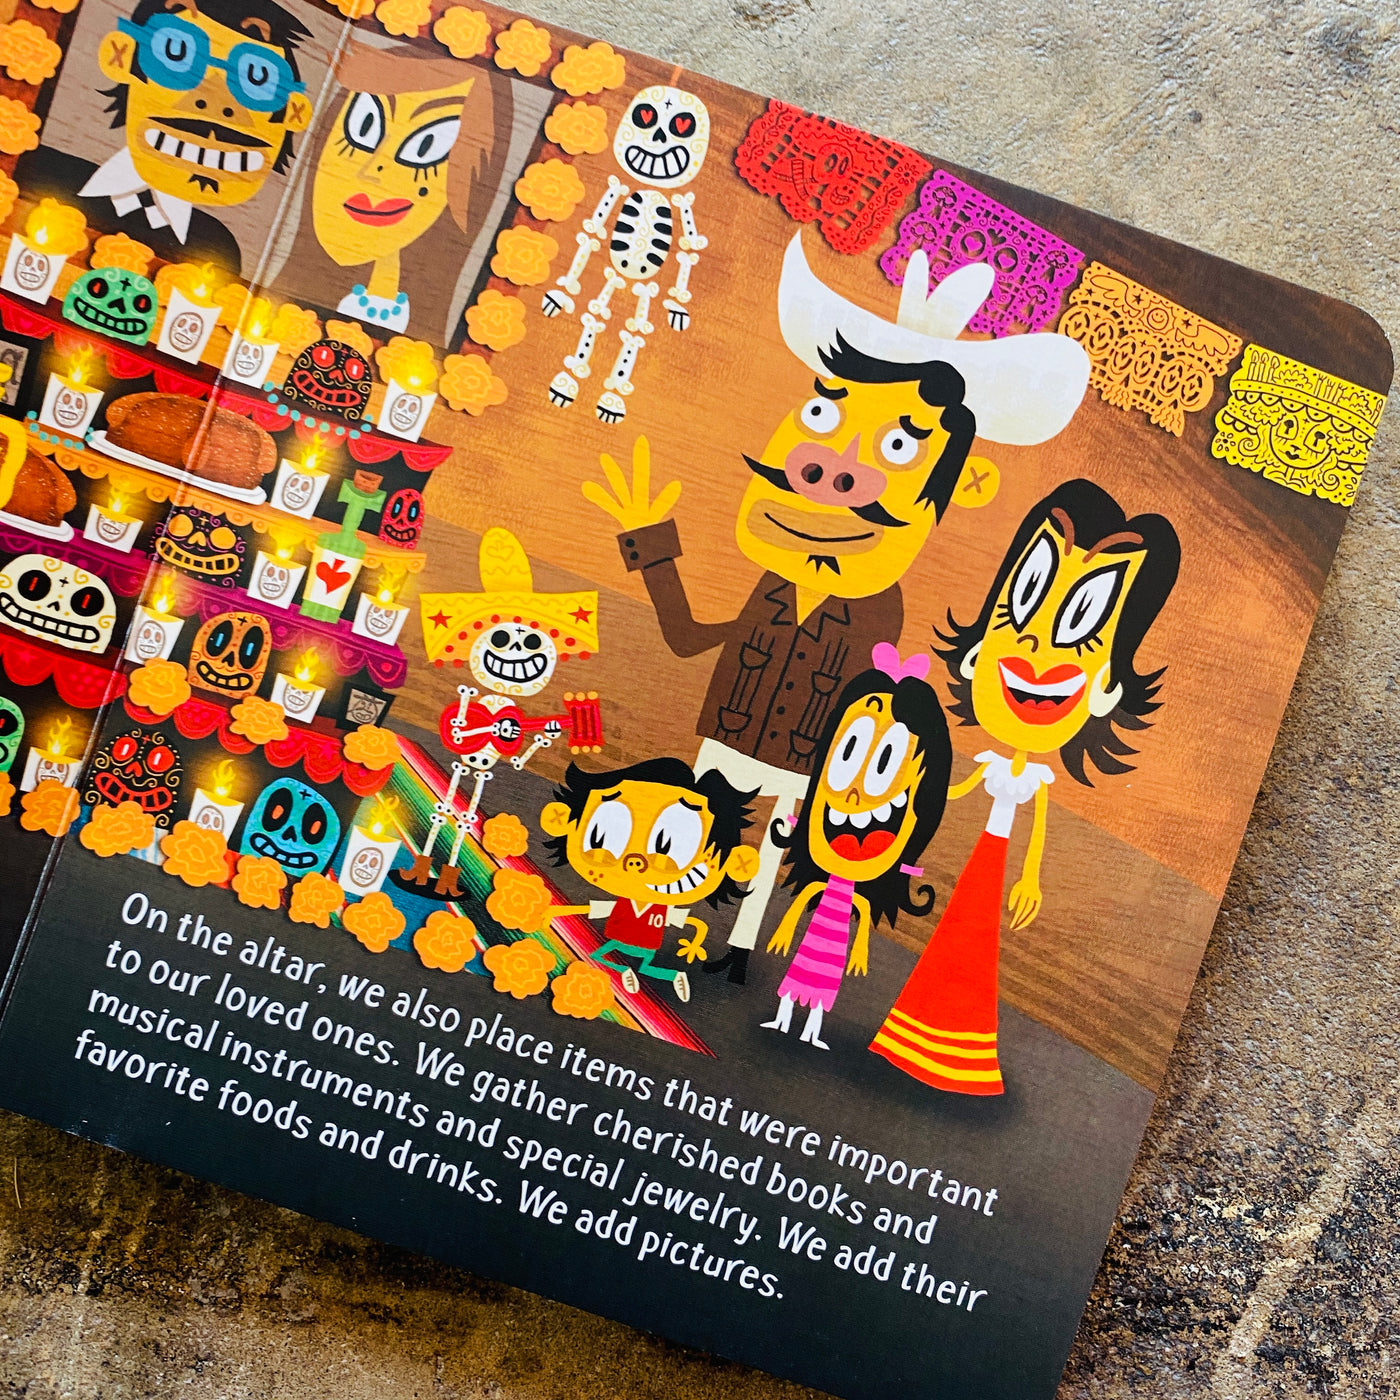 Inside of view of the book featuring a family standing in front of a Dia de los muertos altar with lit candles, colorful papel picado and skeletons playing a guitar.